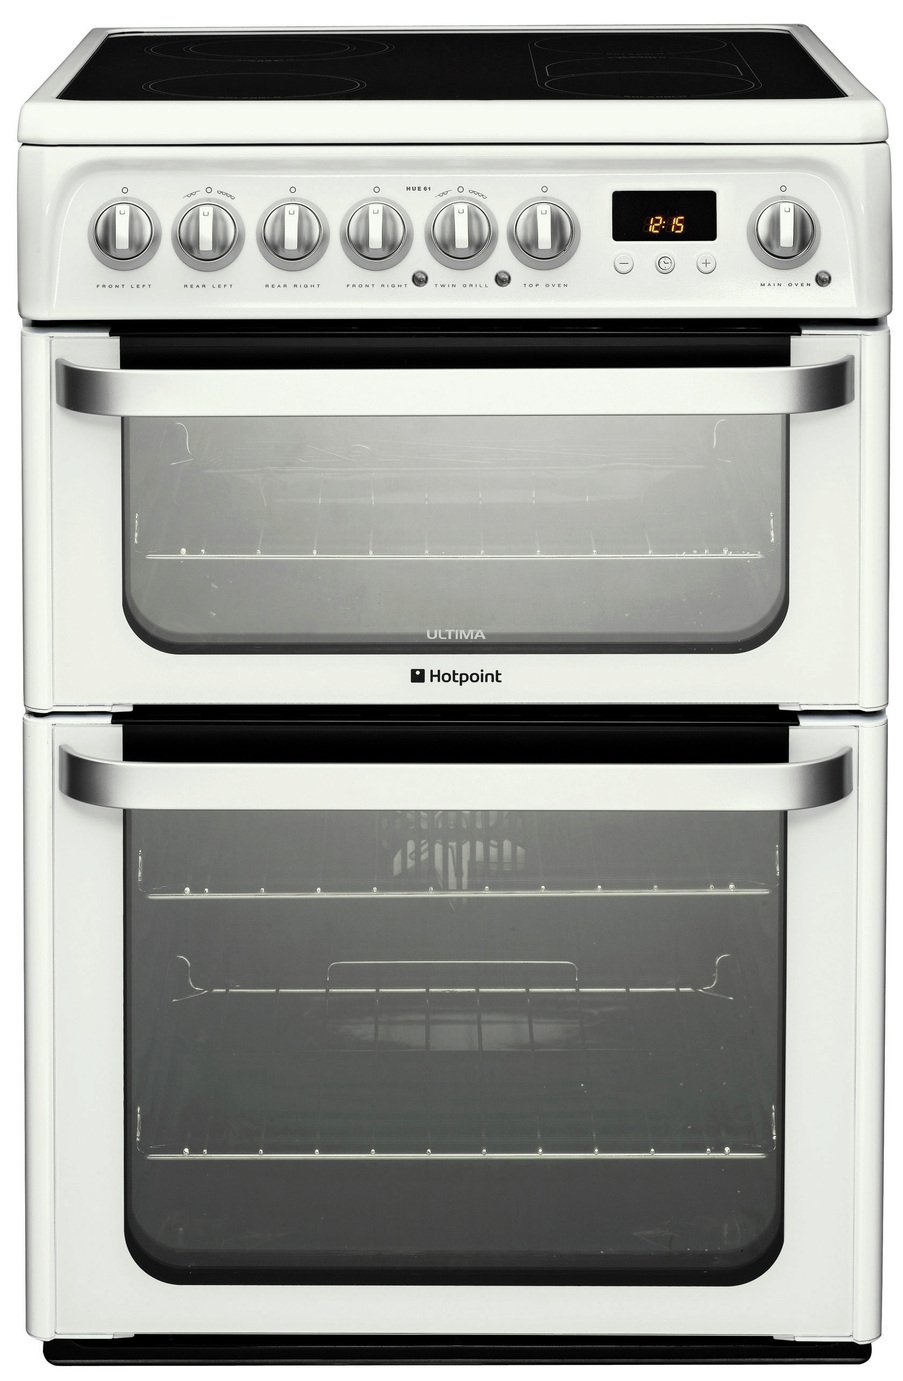 white double oven electric cooker